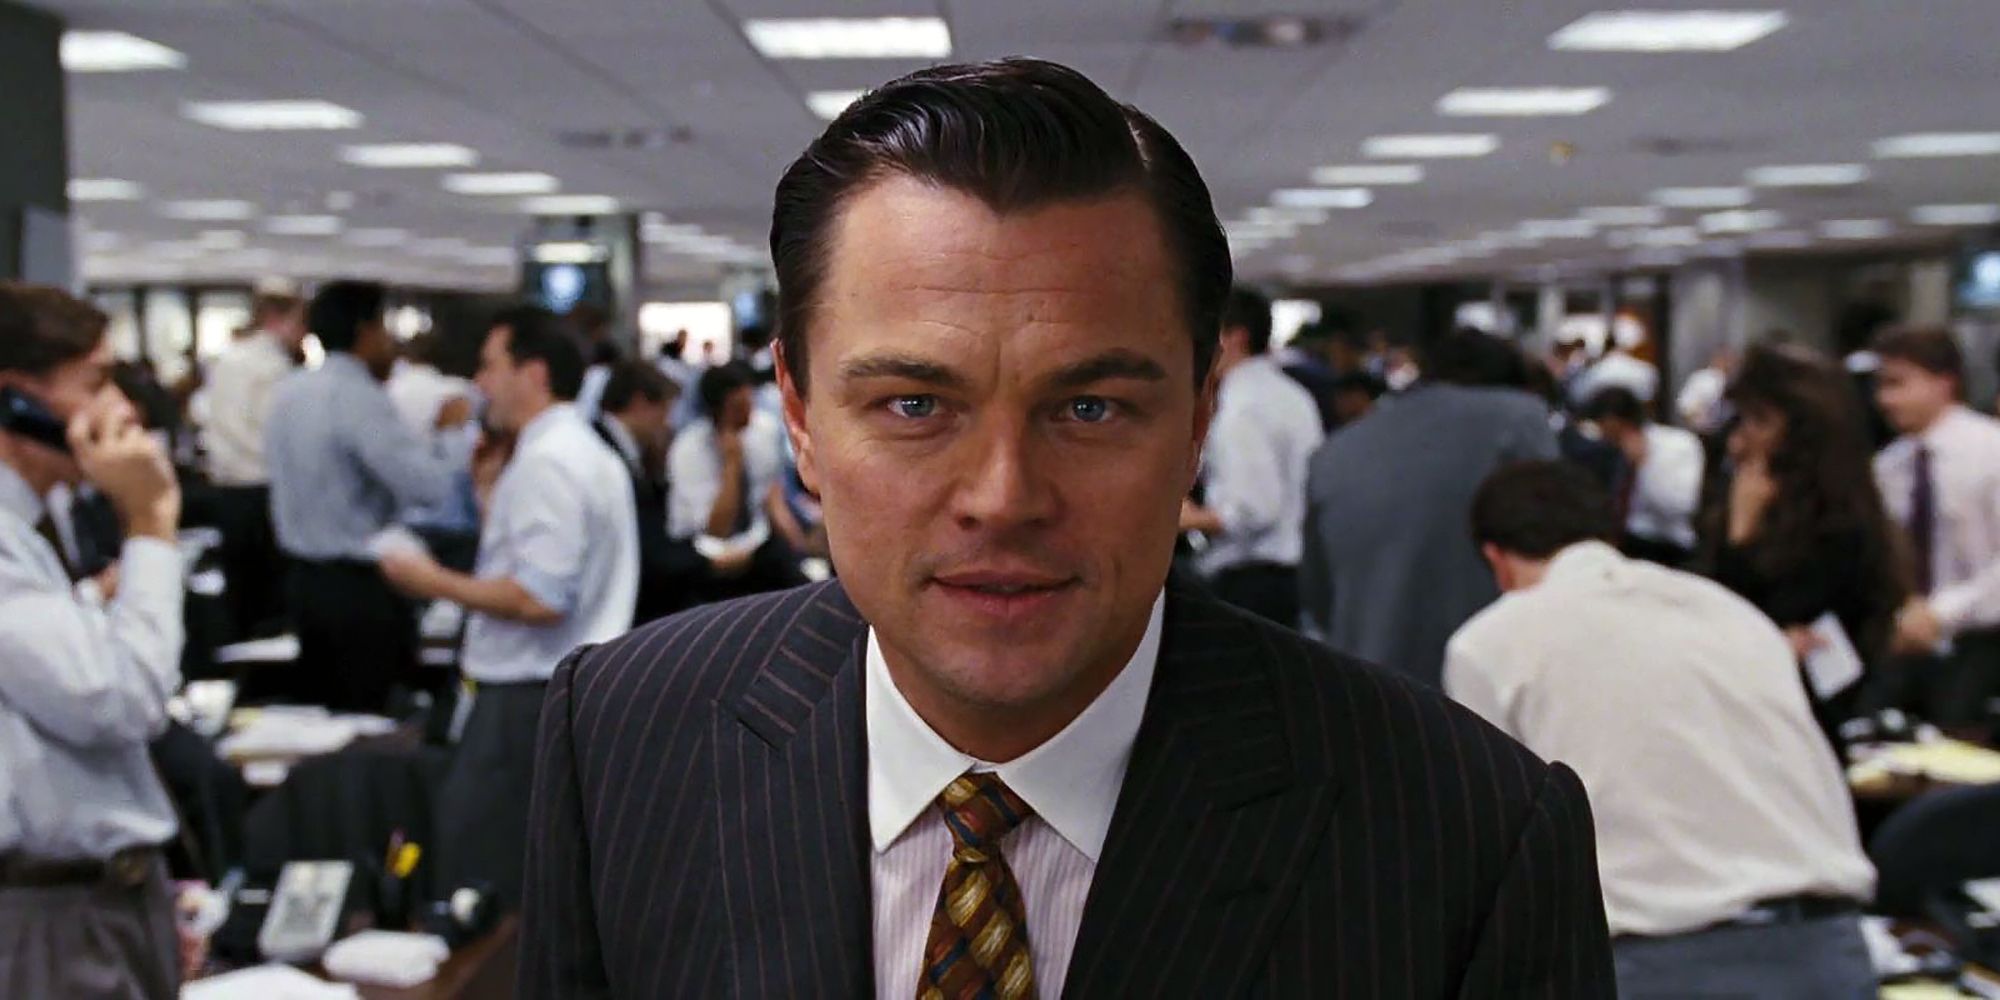 'The Wolf of Wall Street's use of fourth wall breakage helps connect the character with the audience